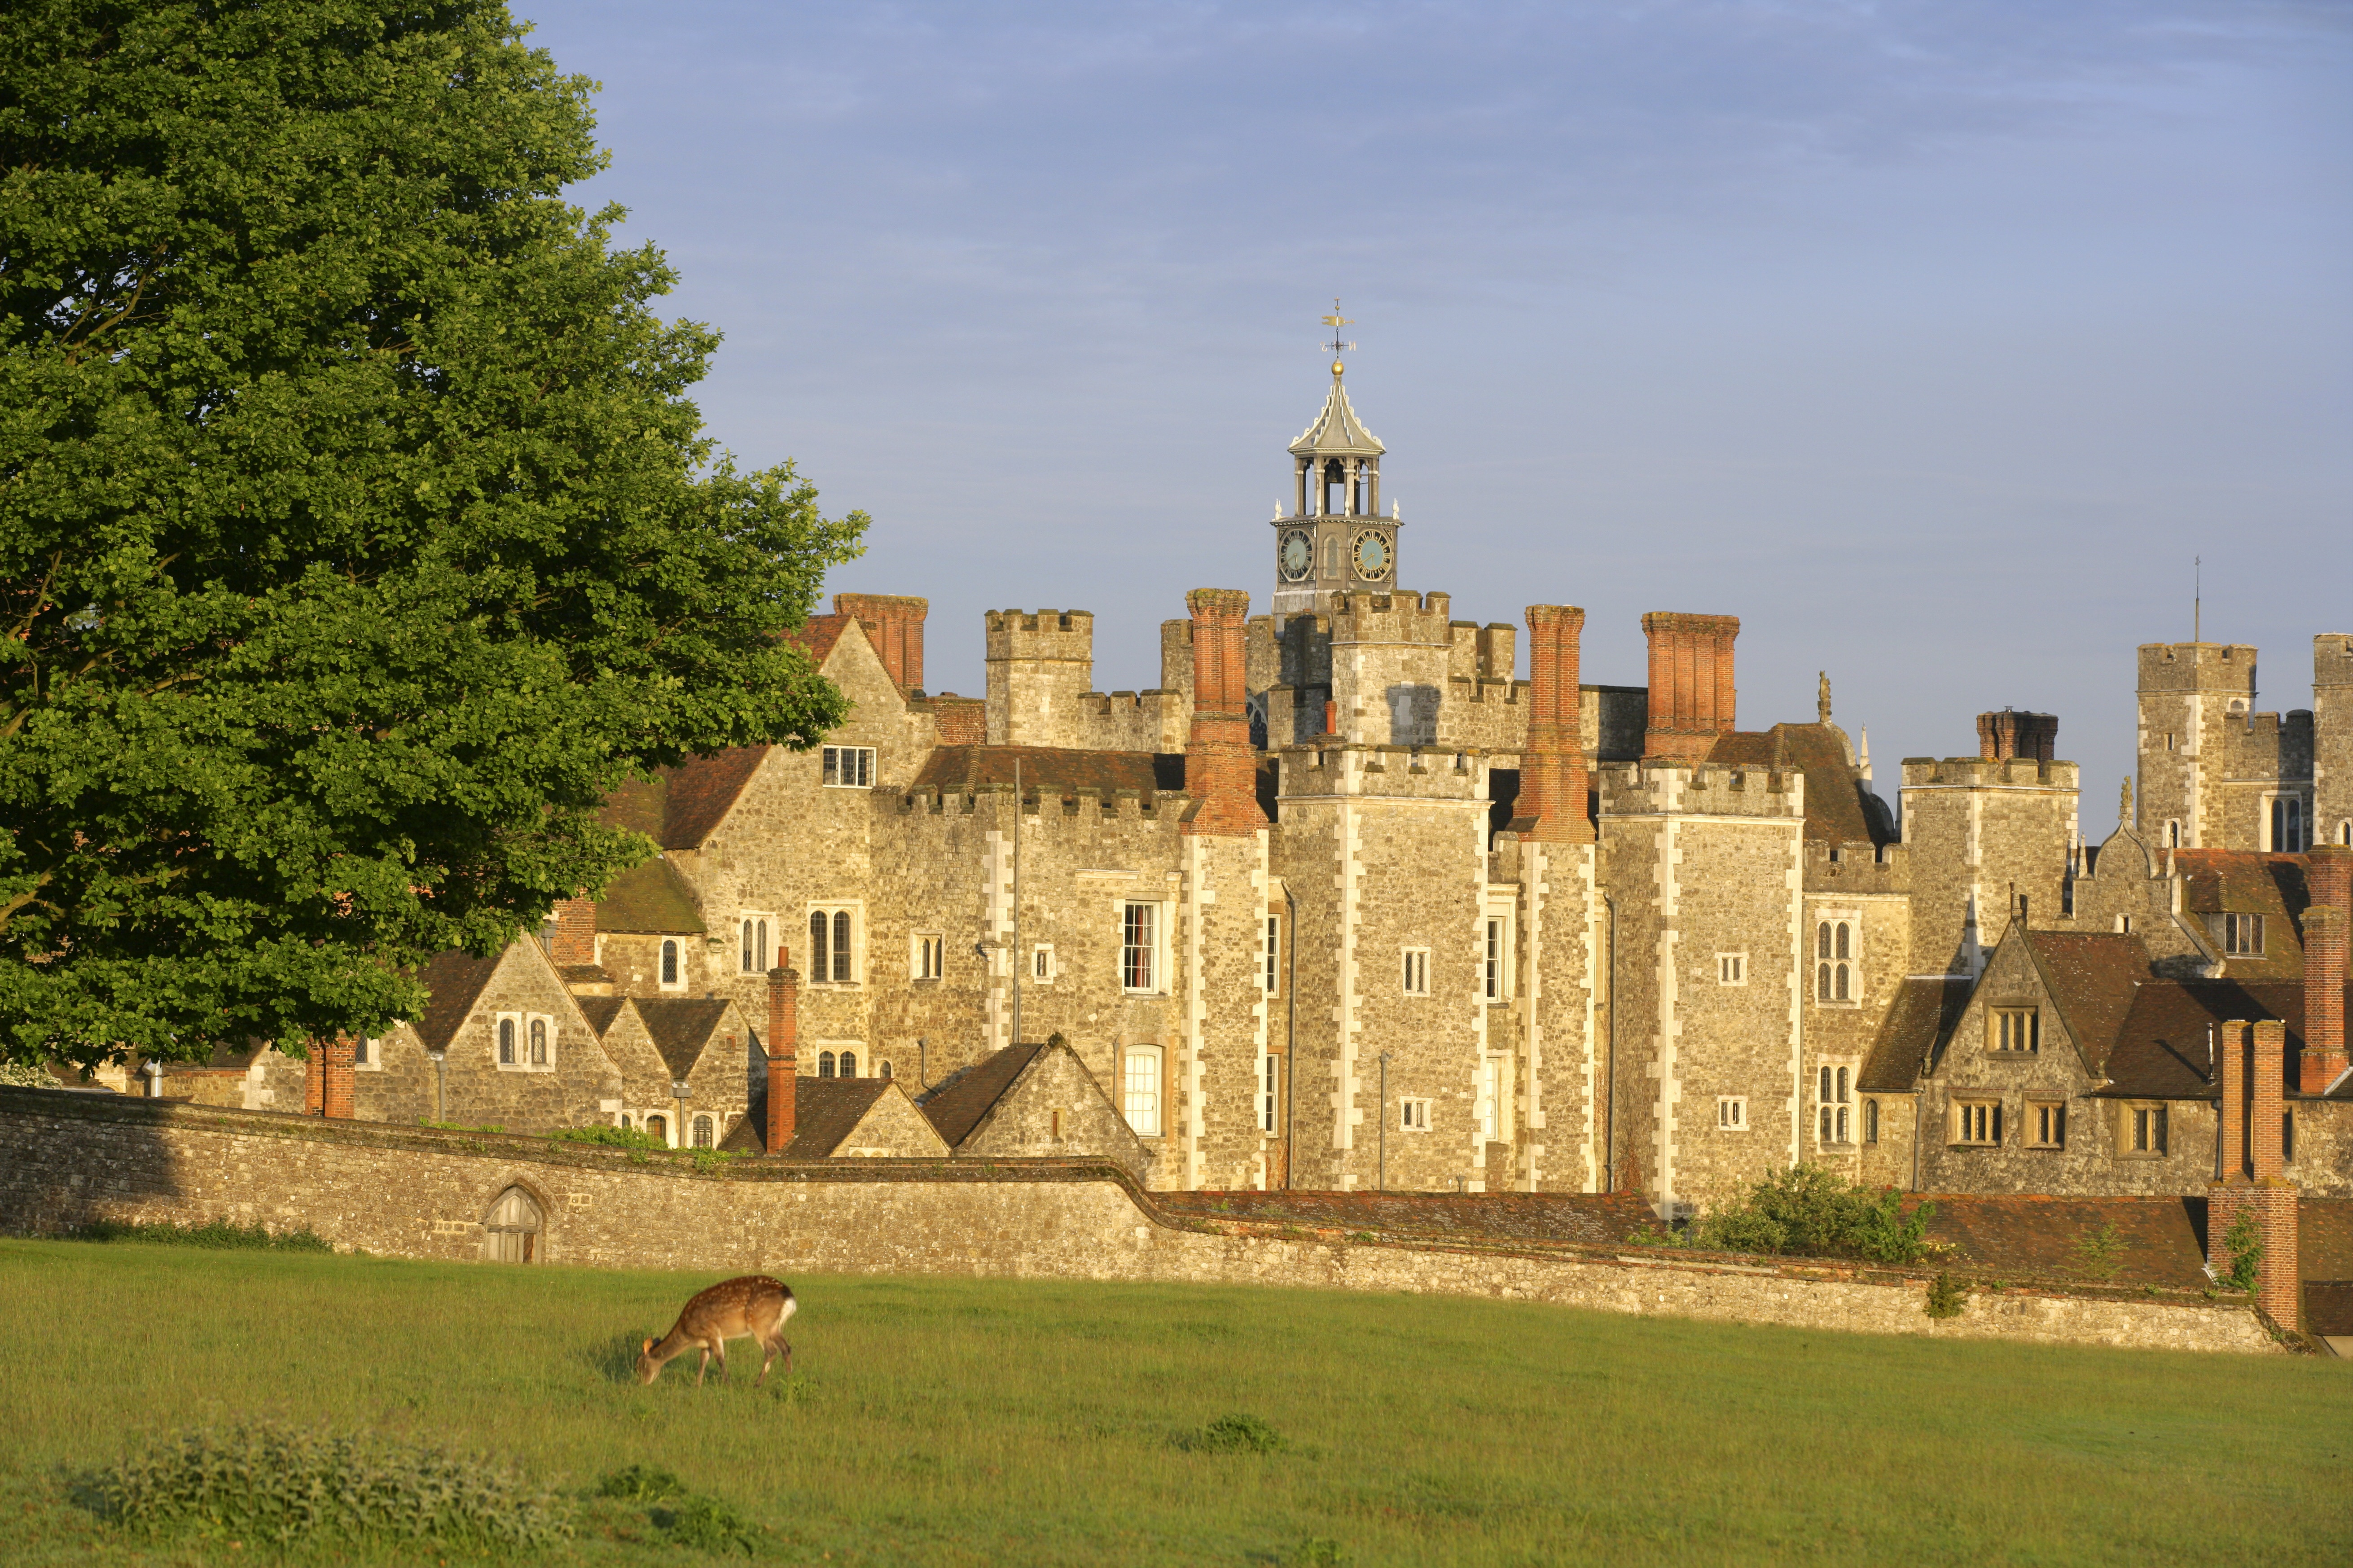 Knole: A Private View into One of Britain’s Great Houses